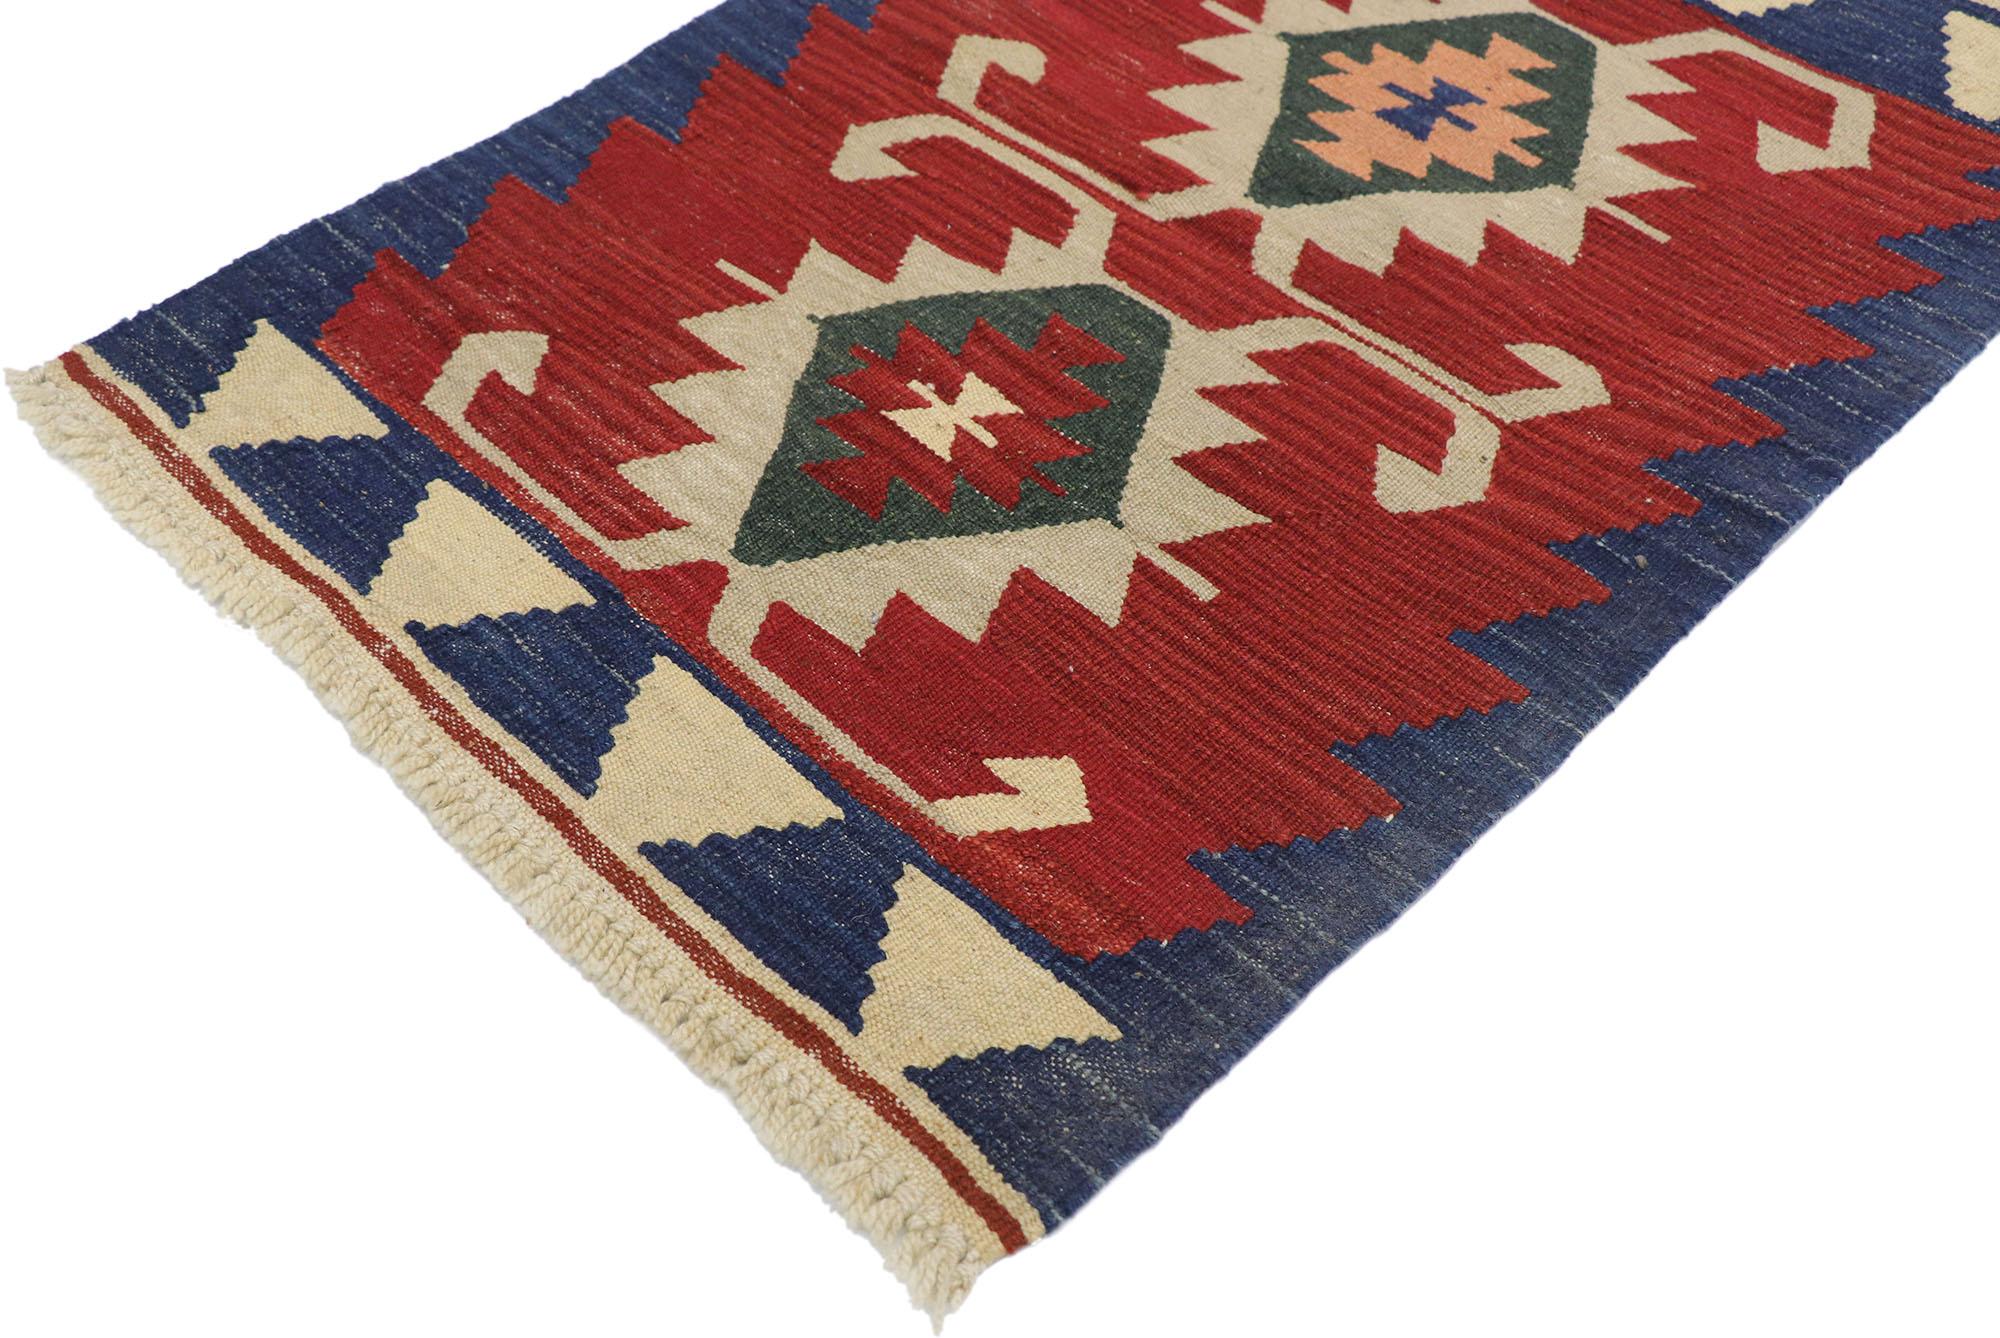 77858, vintage Persian Shiraz Kilim rug with Tribal style. Full of tiny details and a bold expressive design combined with vibrant colors and tribal style, this hand-woven wool vintage Persian Shiraz kilim rug is a captivating vision of woven